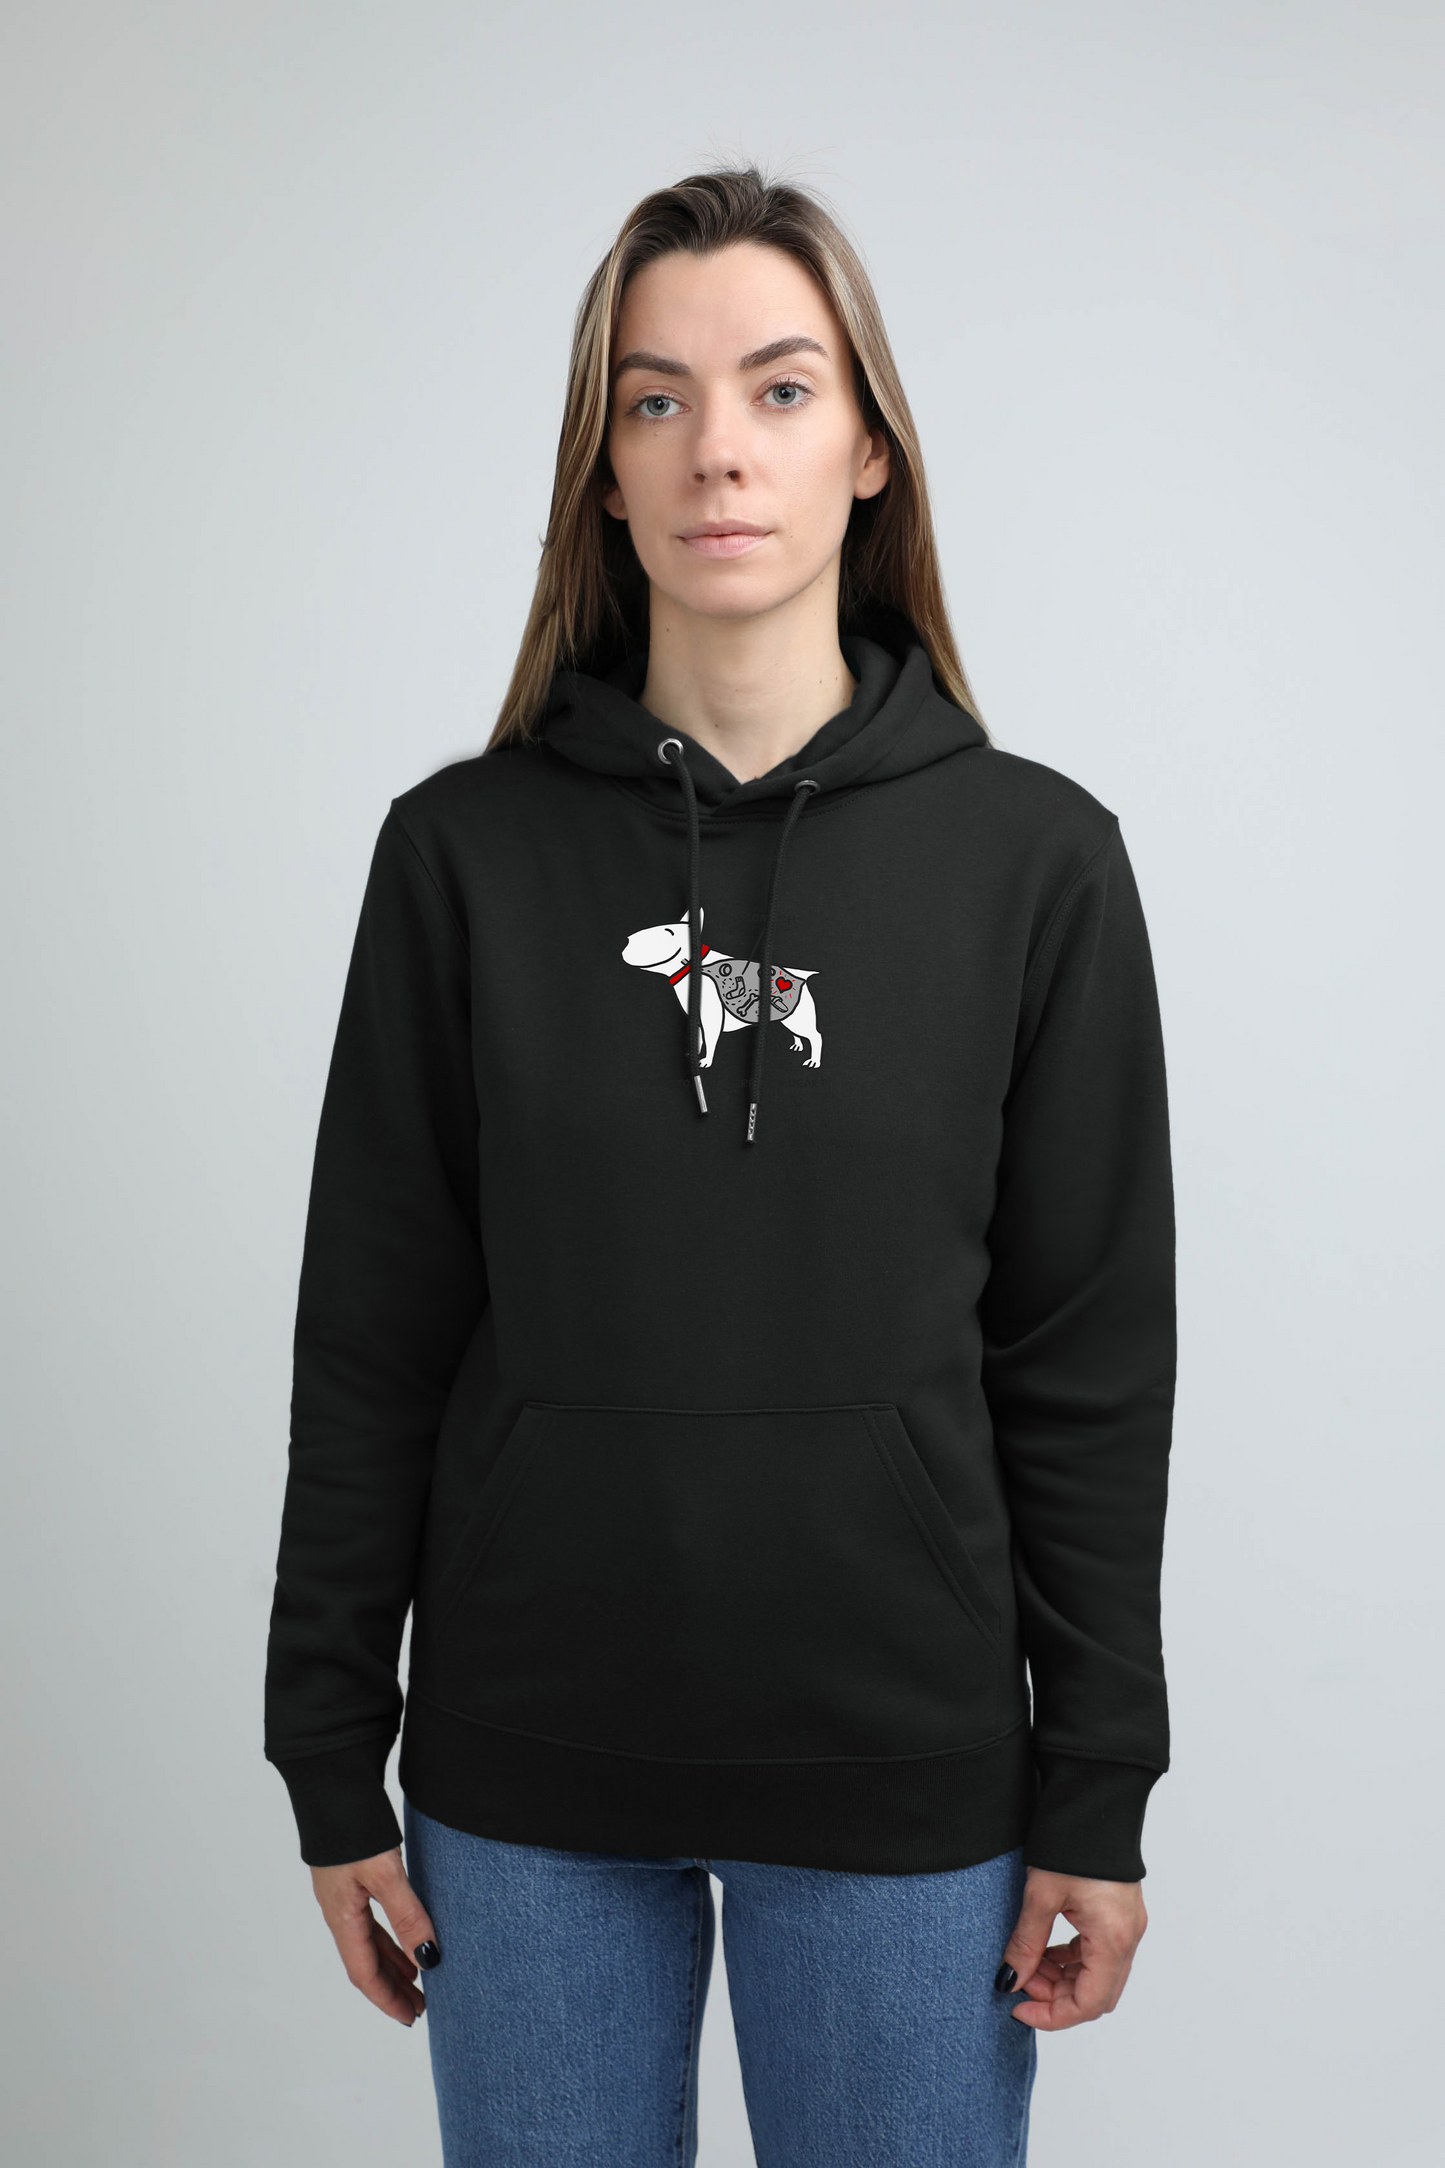 Hungry dog | Hoodie with dog. Regular fit | Unisex by My Wild Other